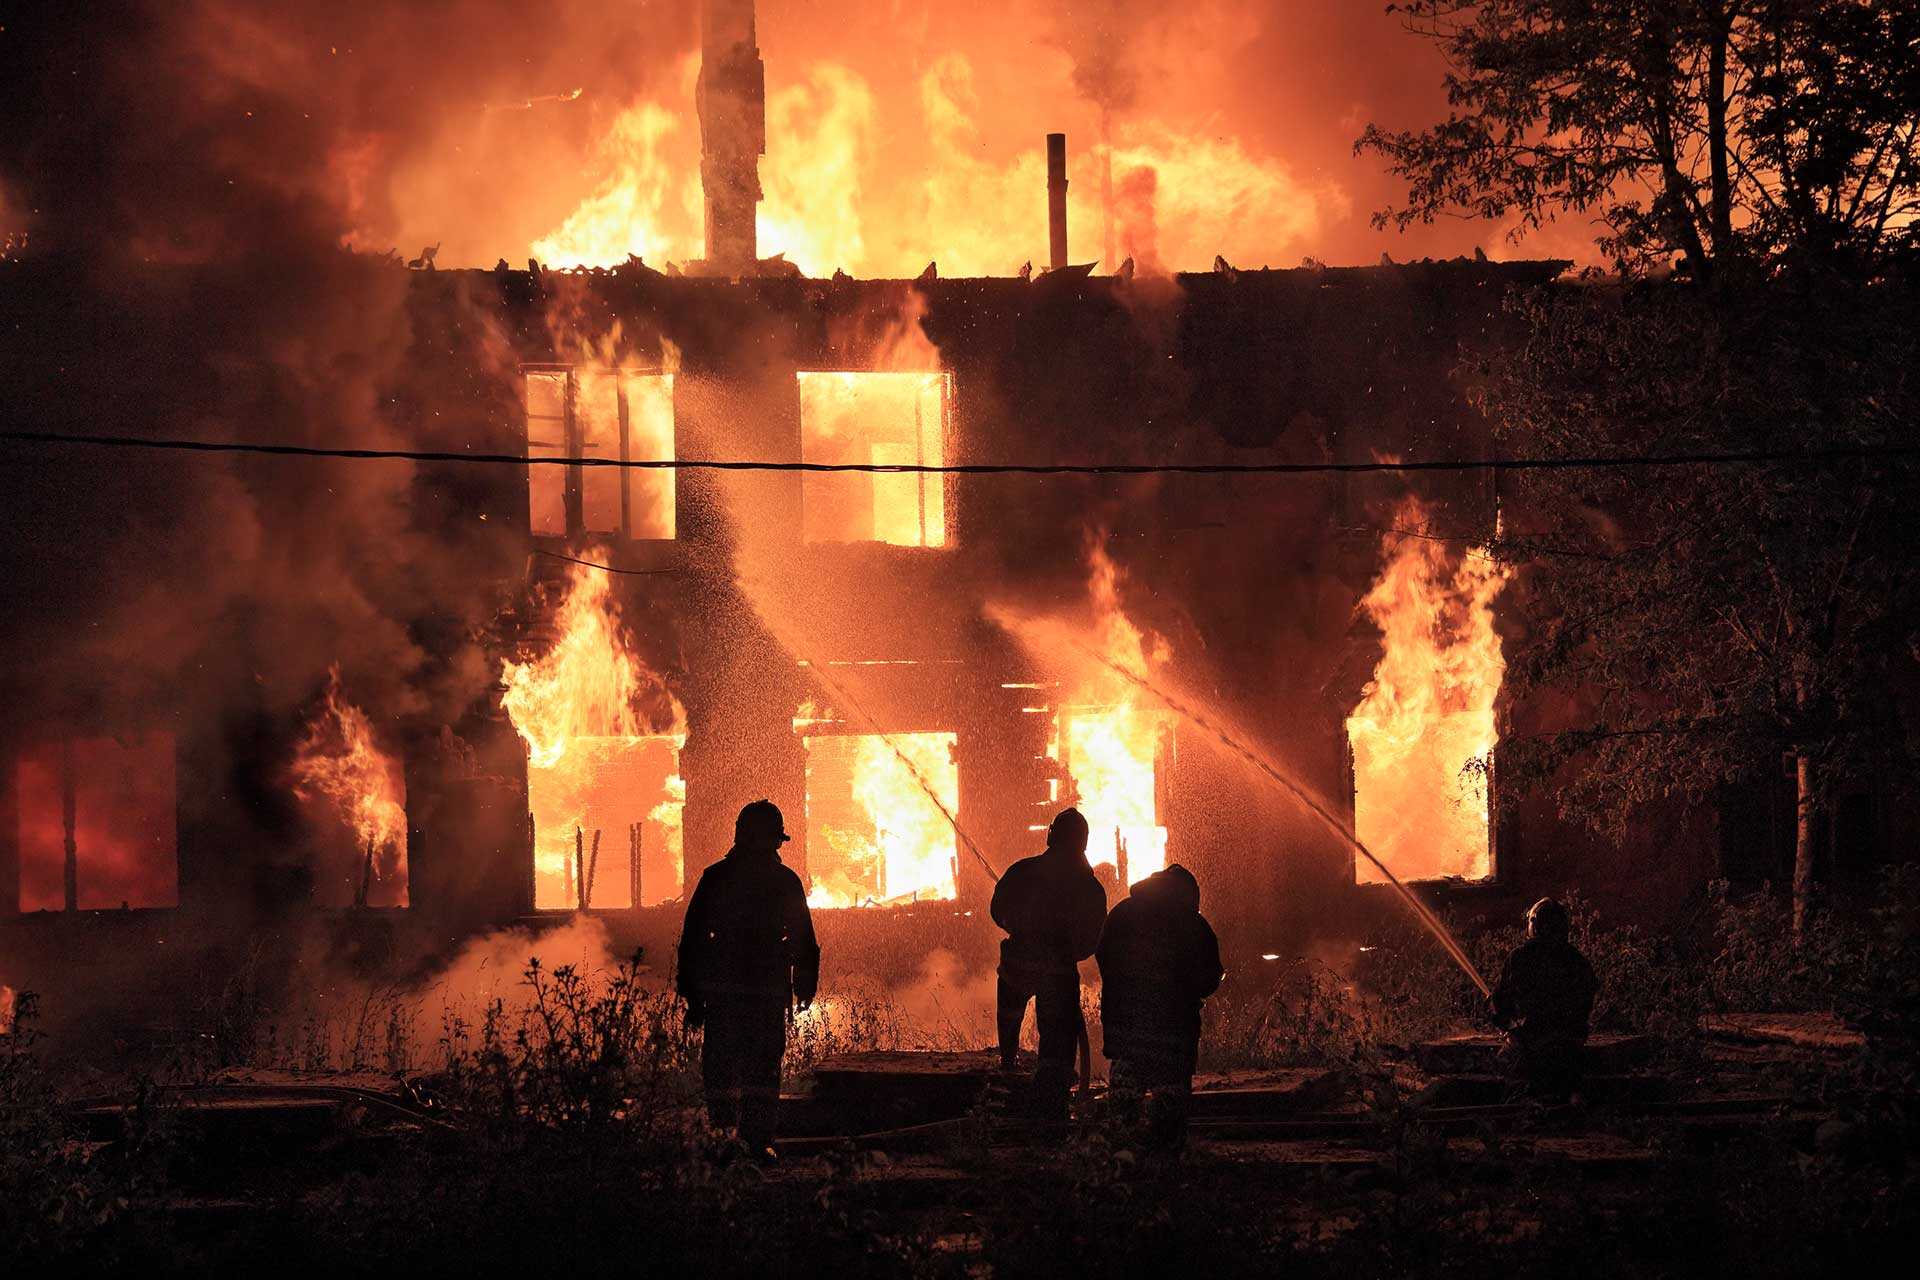 Firefighters tackling a burning building